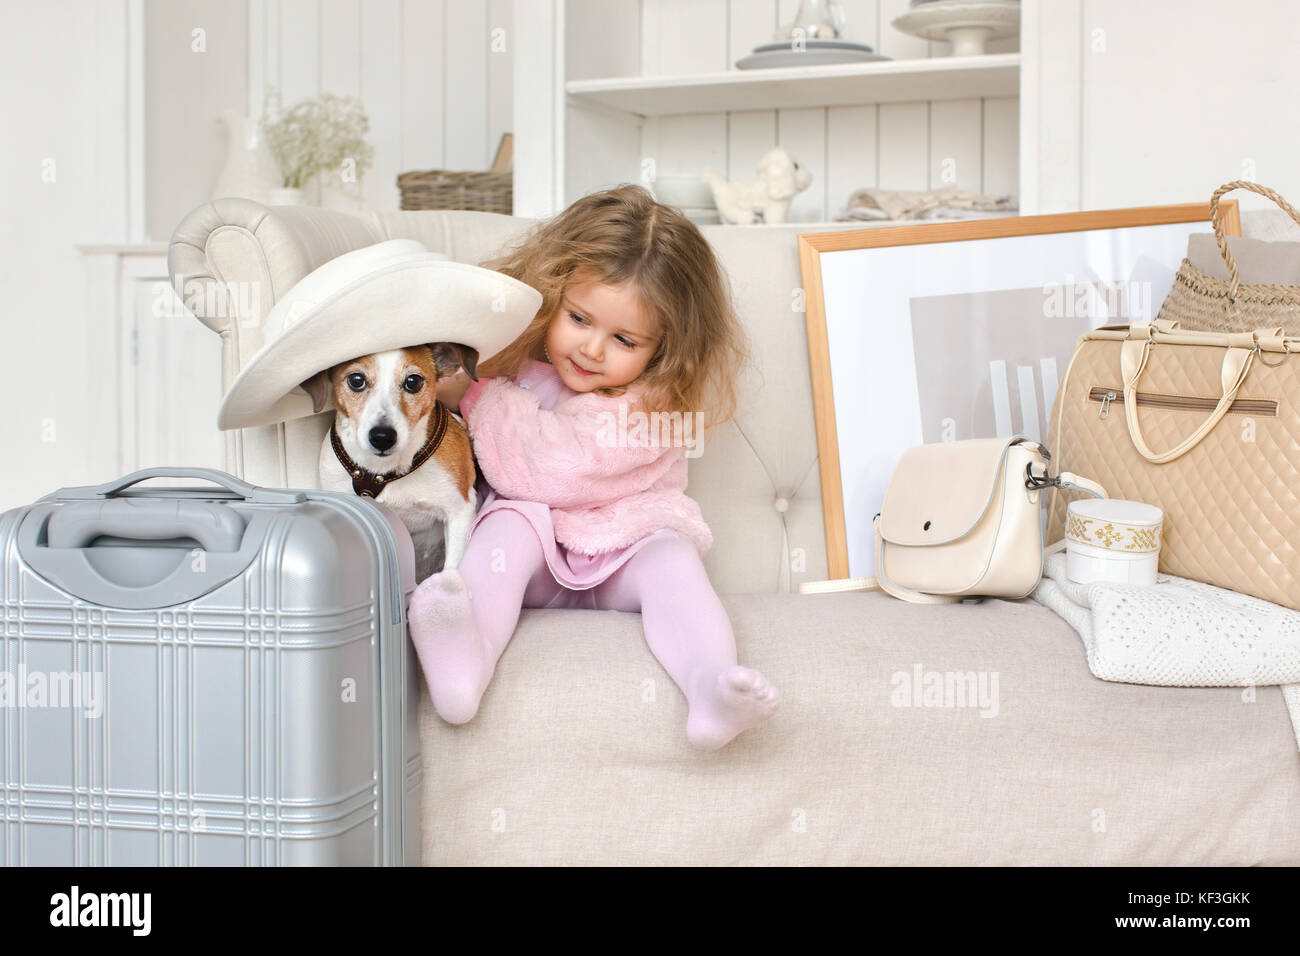 A little girl with suitcases and a dog in interior Stock Photo